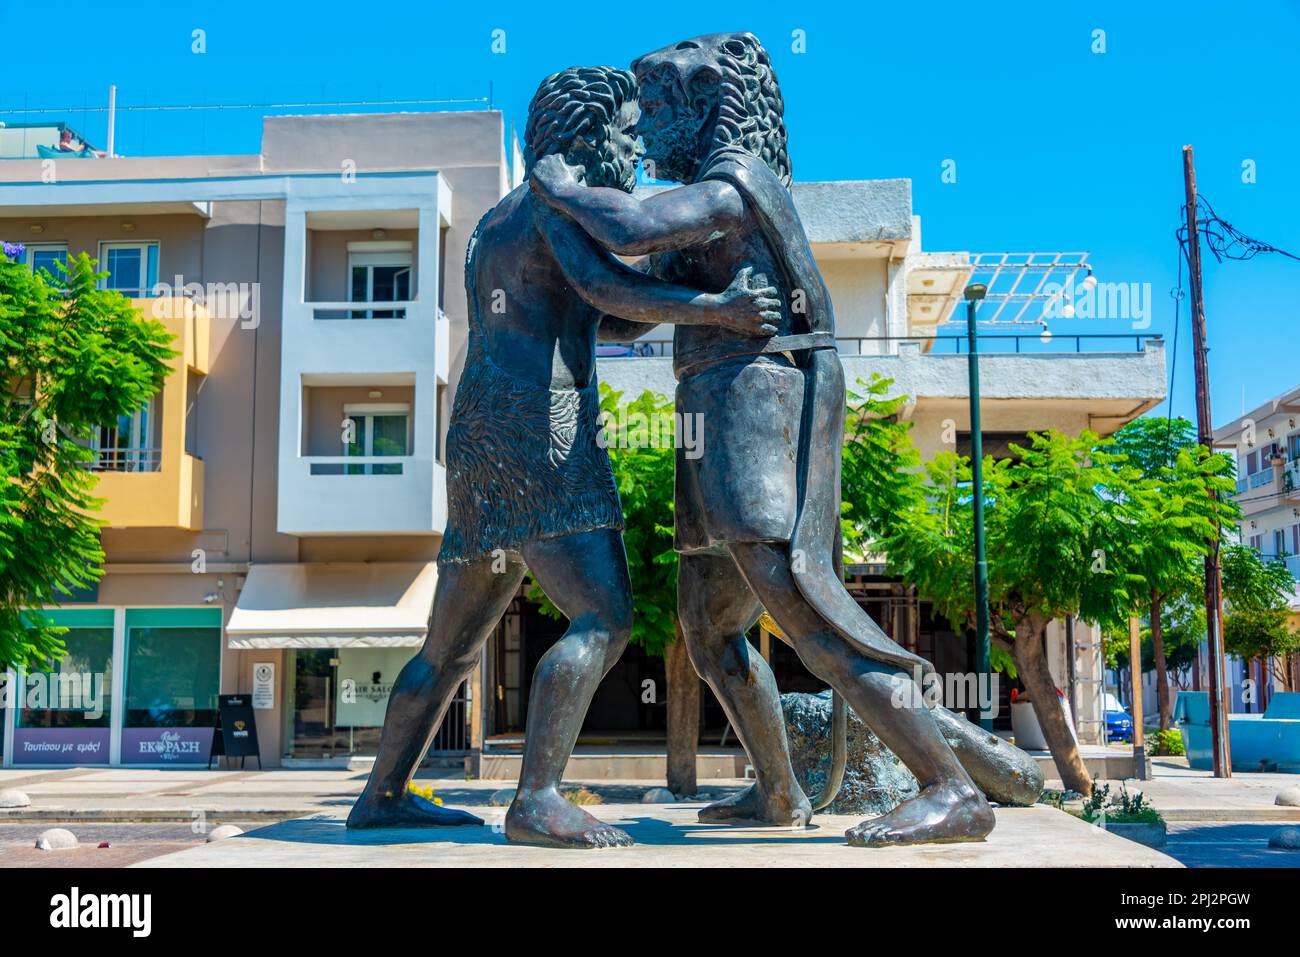 Kos, Greece, August 28, 2022: The mythological wrestling match between Herakles and Antagoras at Kos, Greece. Stock Photo